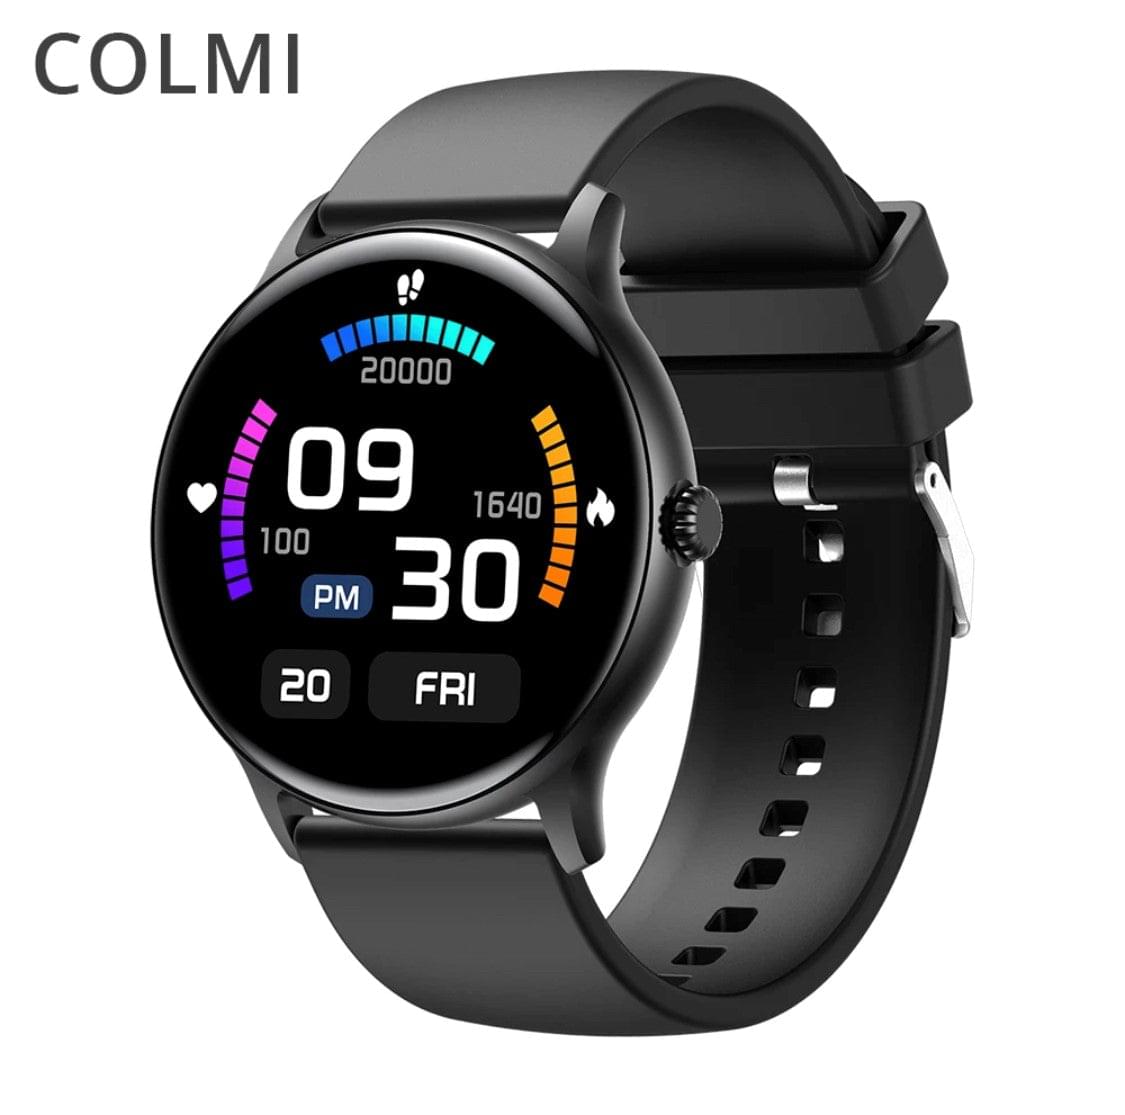 Fashionable & Functional Colmi i10 Pink Smartwatch | Smart Watch South Africa